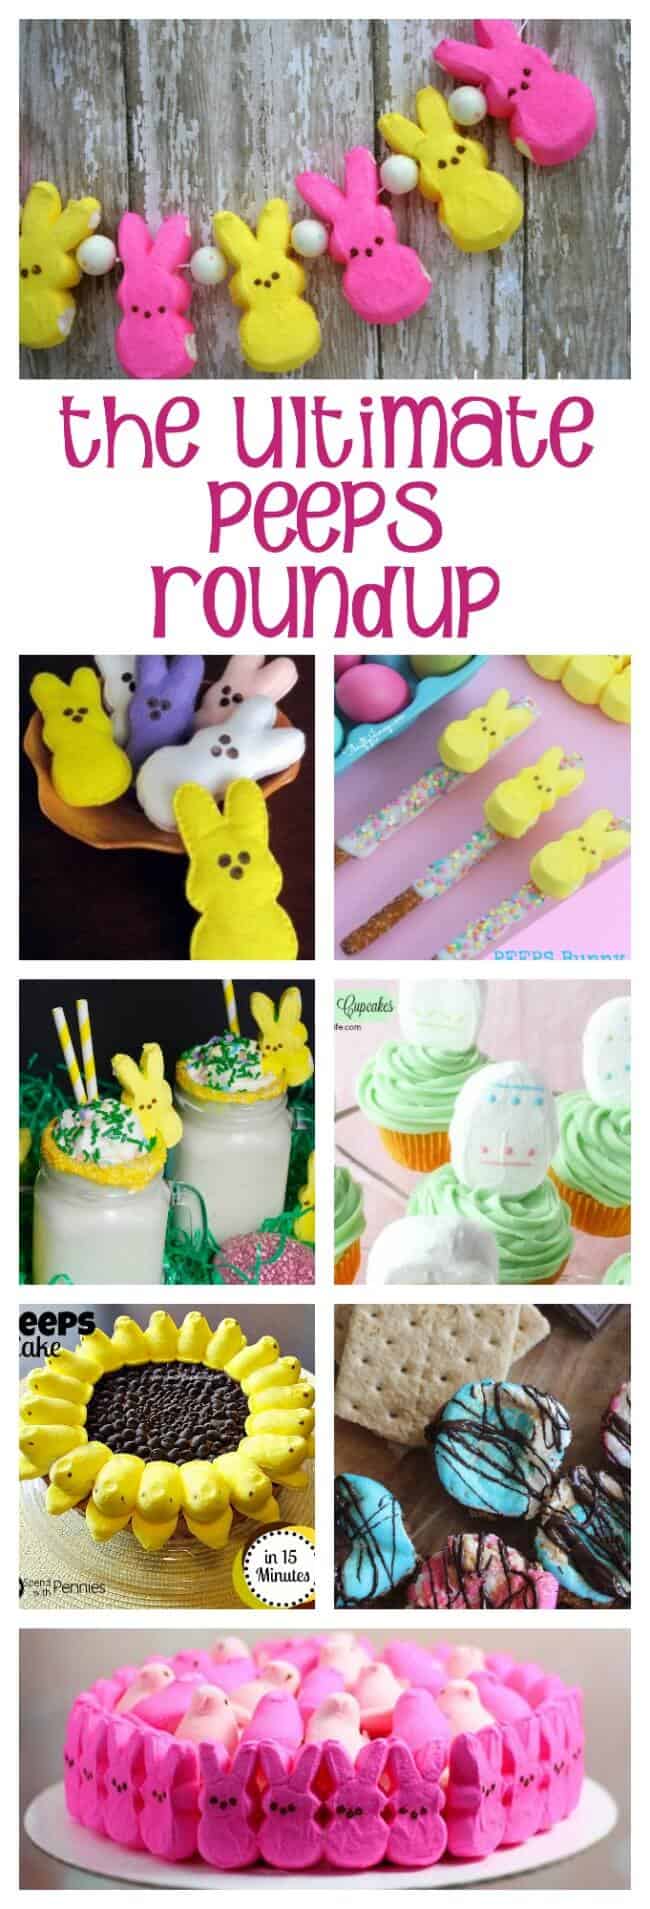 It's the Ultimate Peeps Roundup: desserts, drinks, printables, dips, and more, all centered around the iconic Easter Peeps marshmallows!